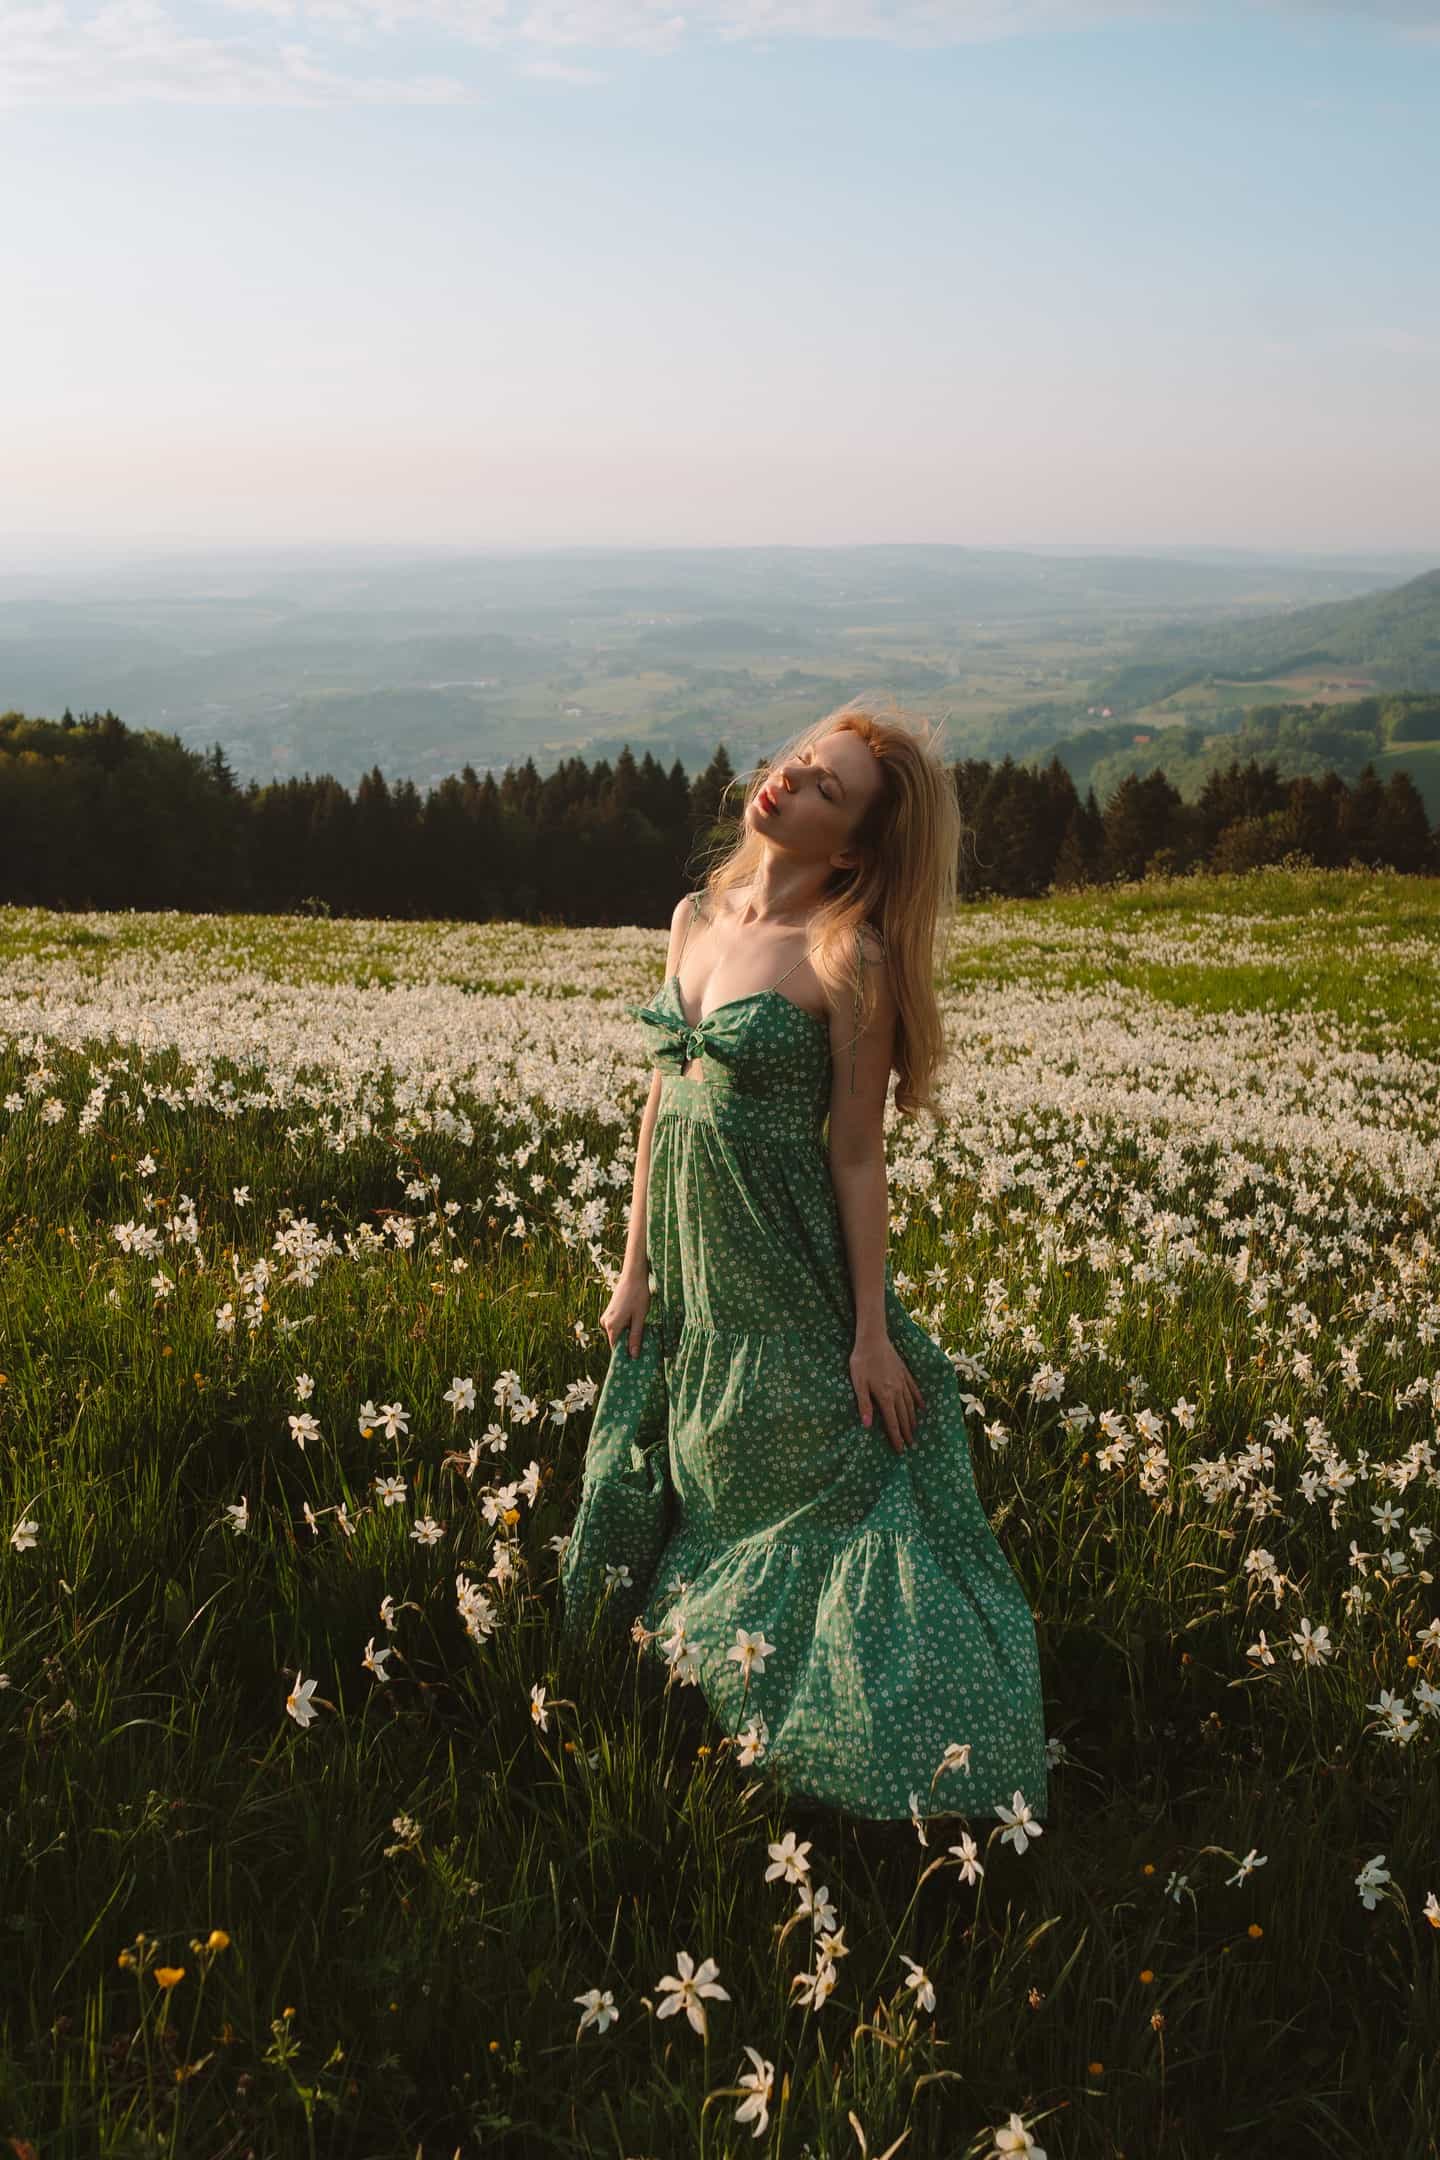 Meadow Whisper Dress image featured